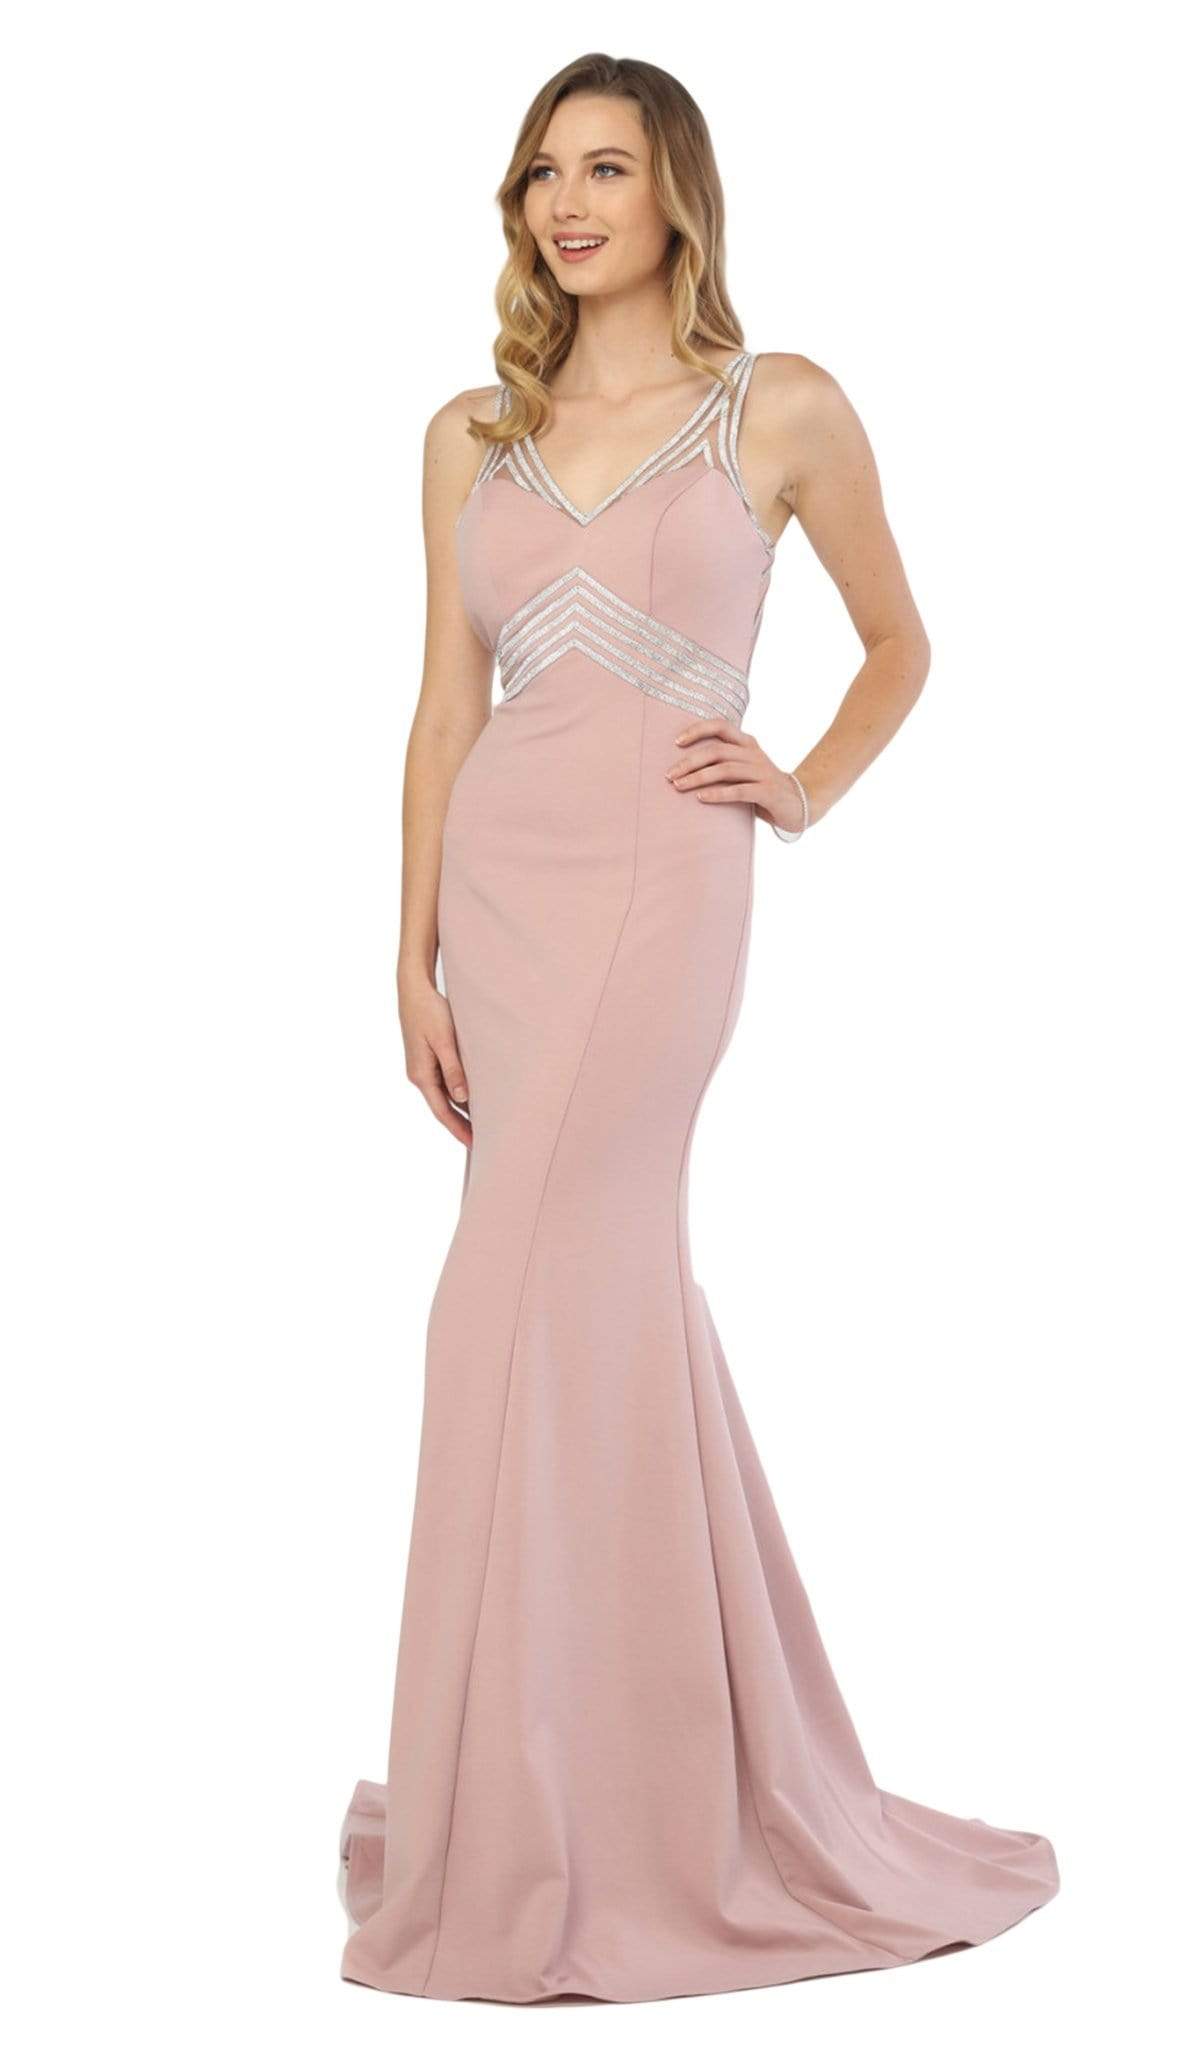 Image of Nox Anabel - T253 Metallic Stripped Illusion Cutout Back Gown